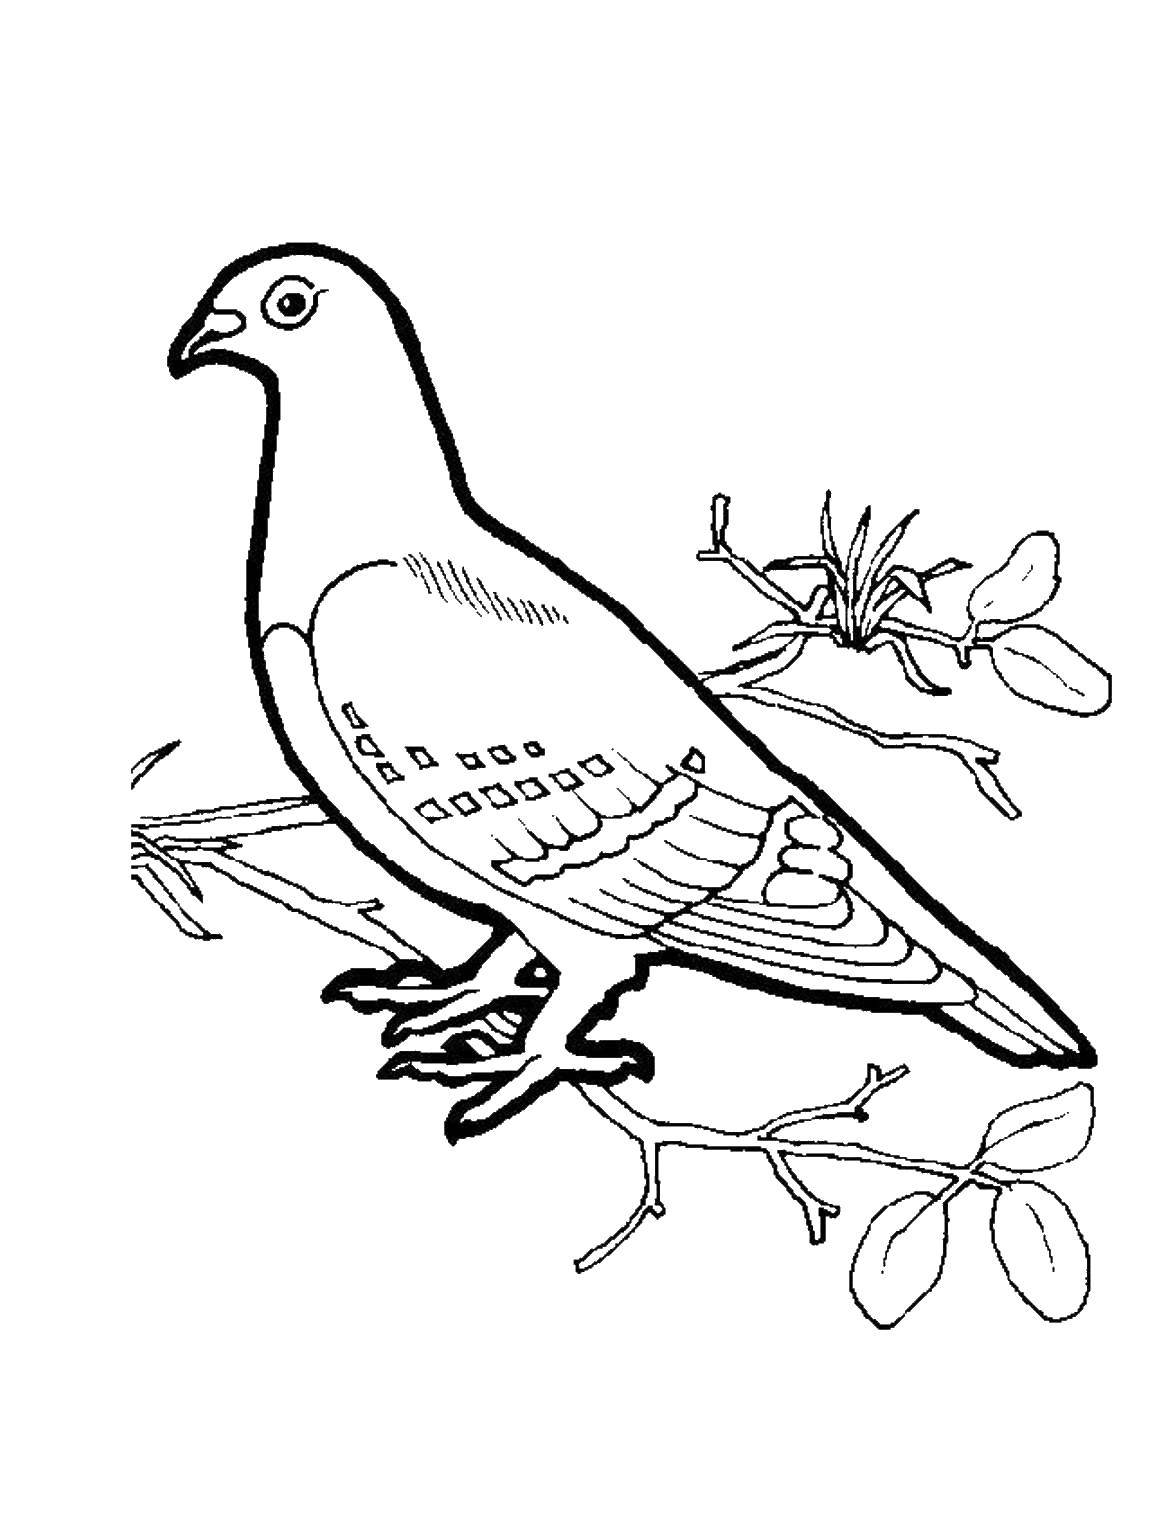 Coloring Pigeon on branch. Category birds. Tags:  pigeon, branch.